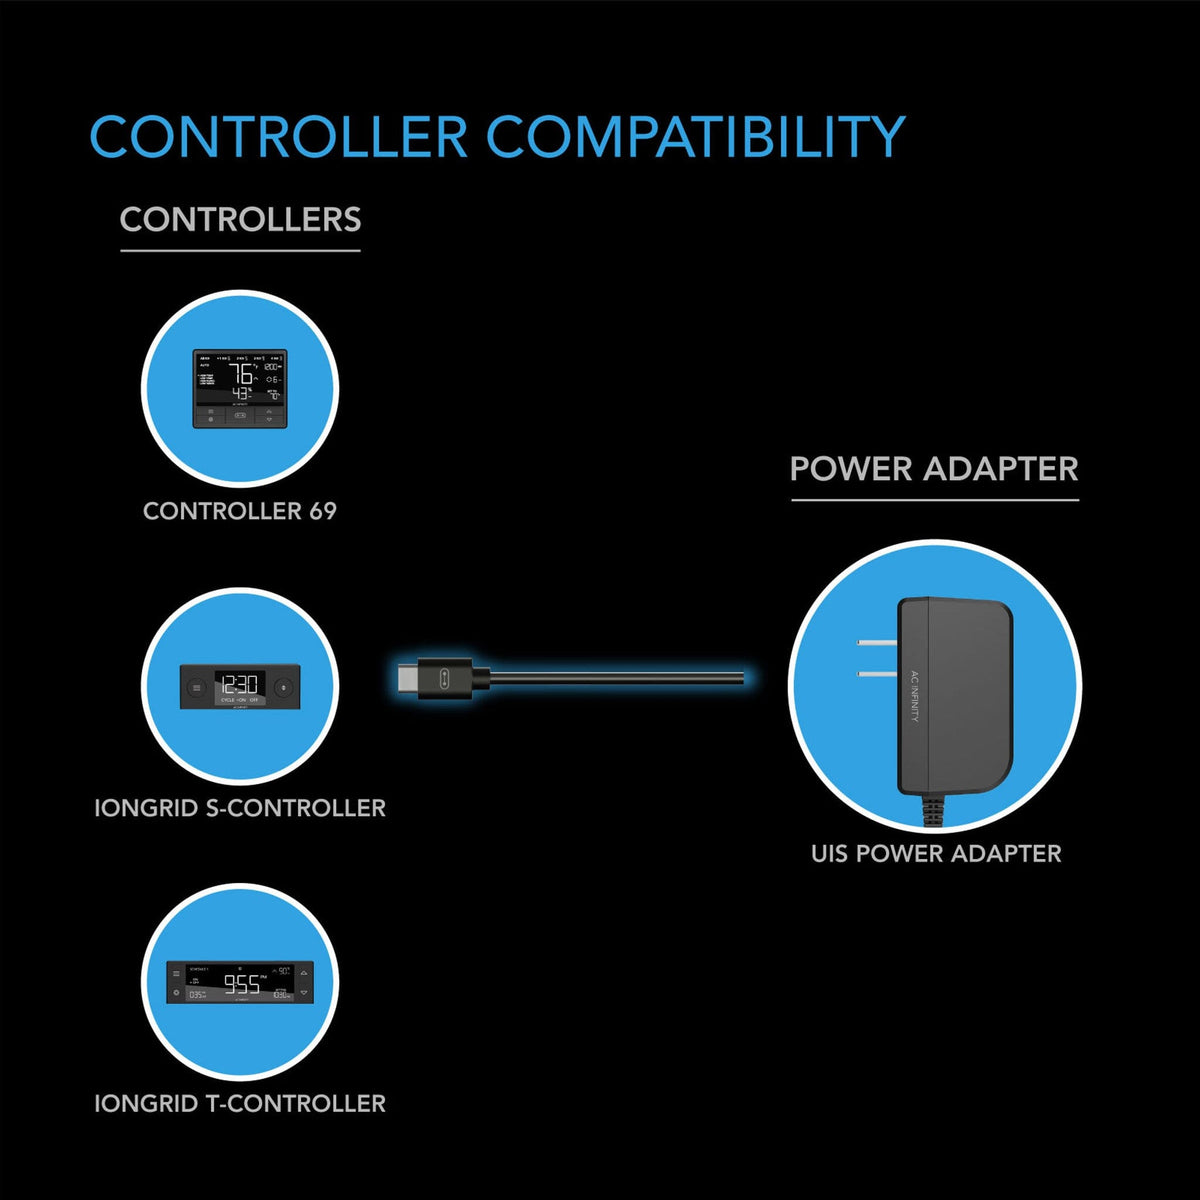 UIS Power Adapter controller compatibility